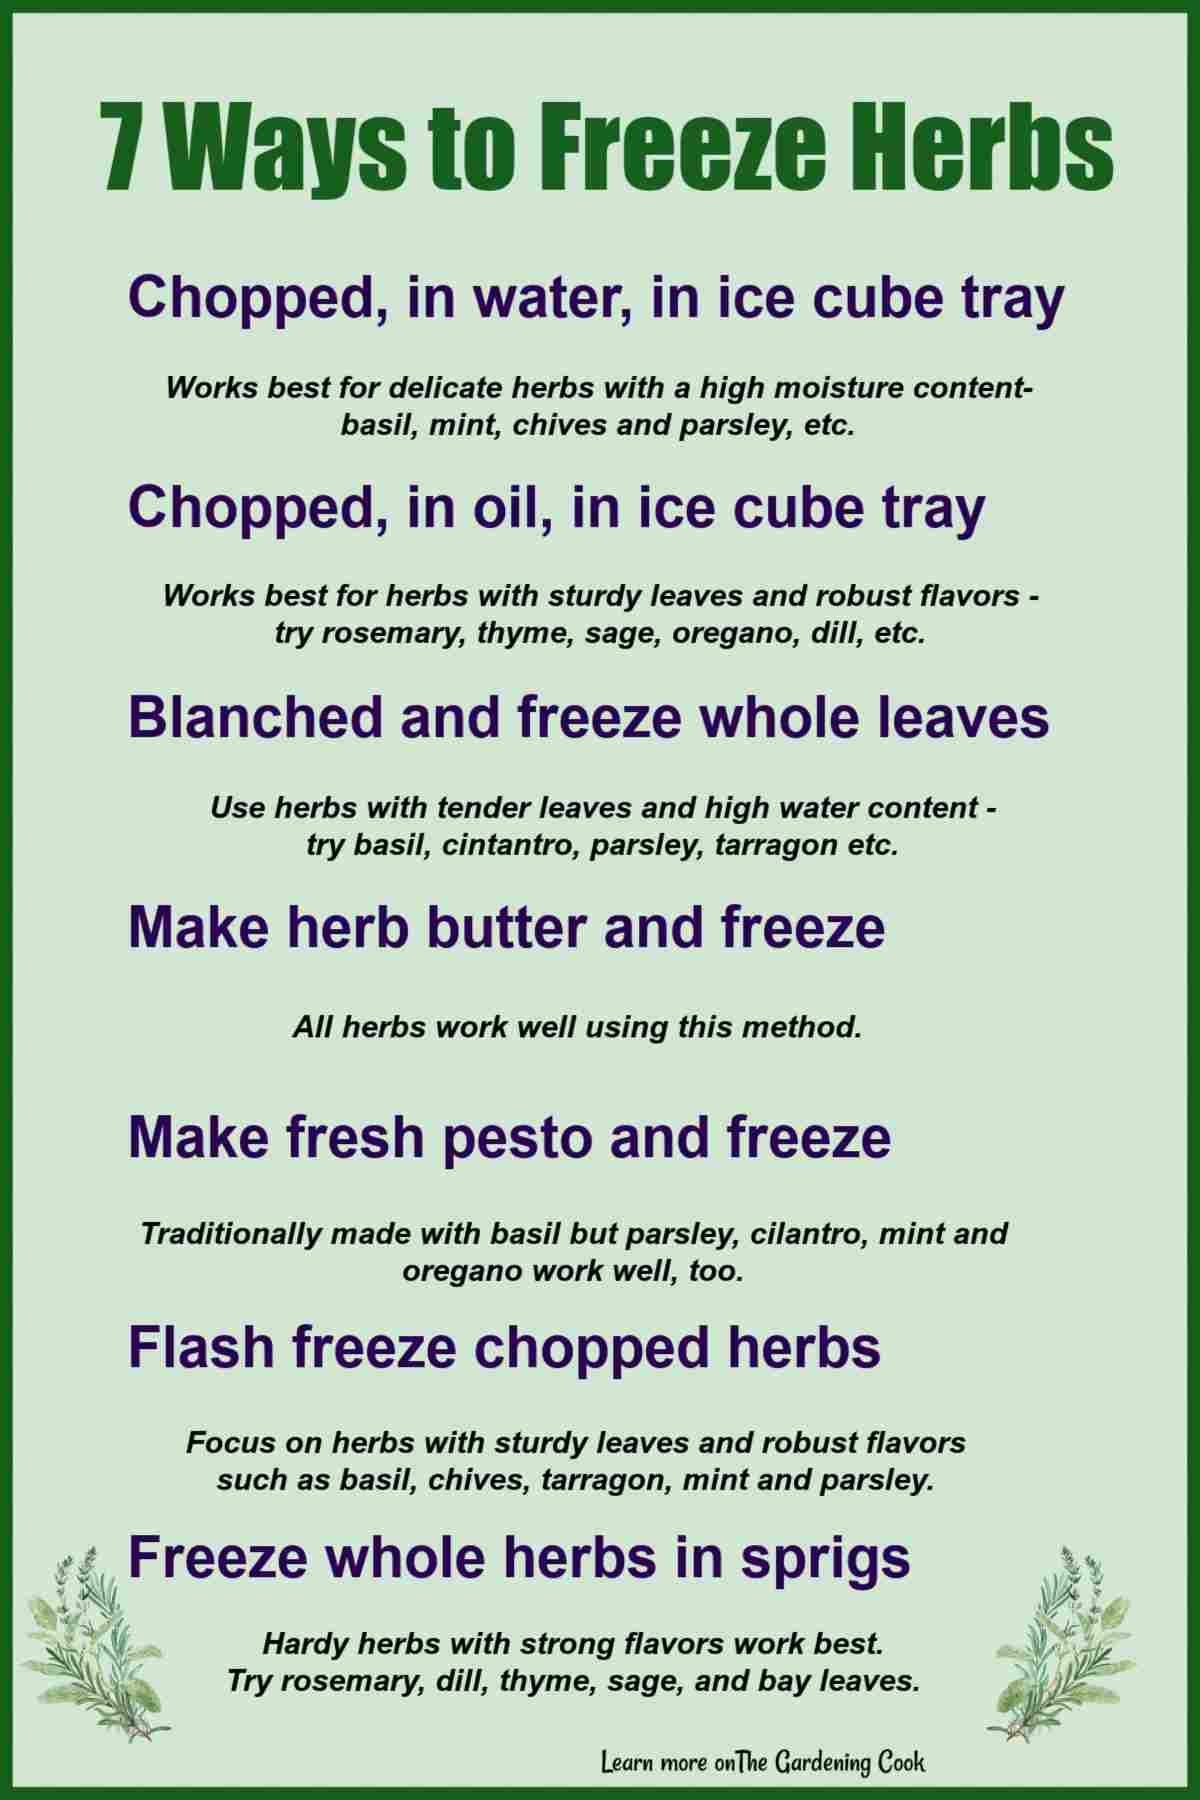 Printable showing 7 ways to freeze herbs.